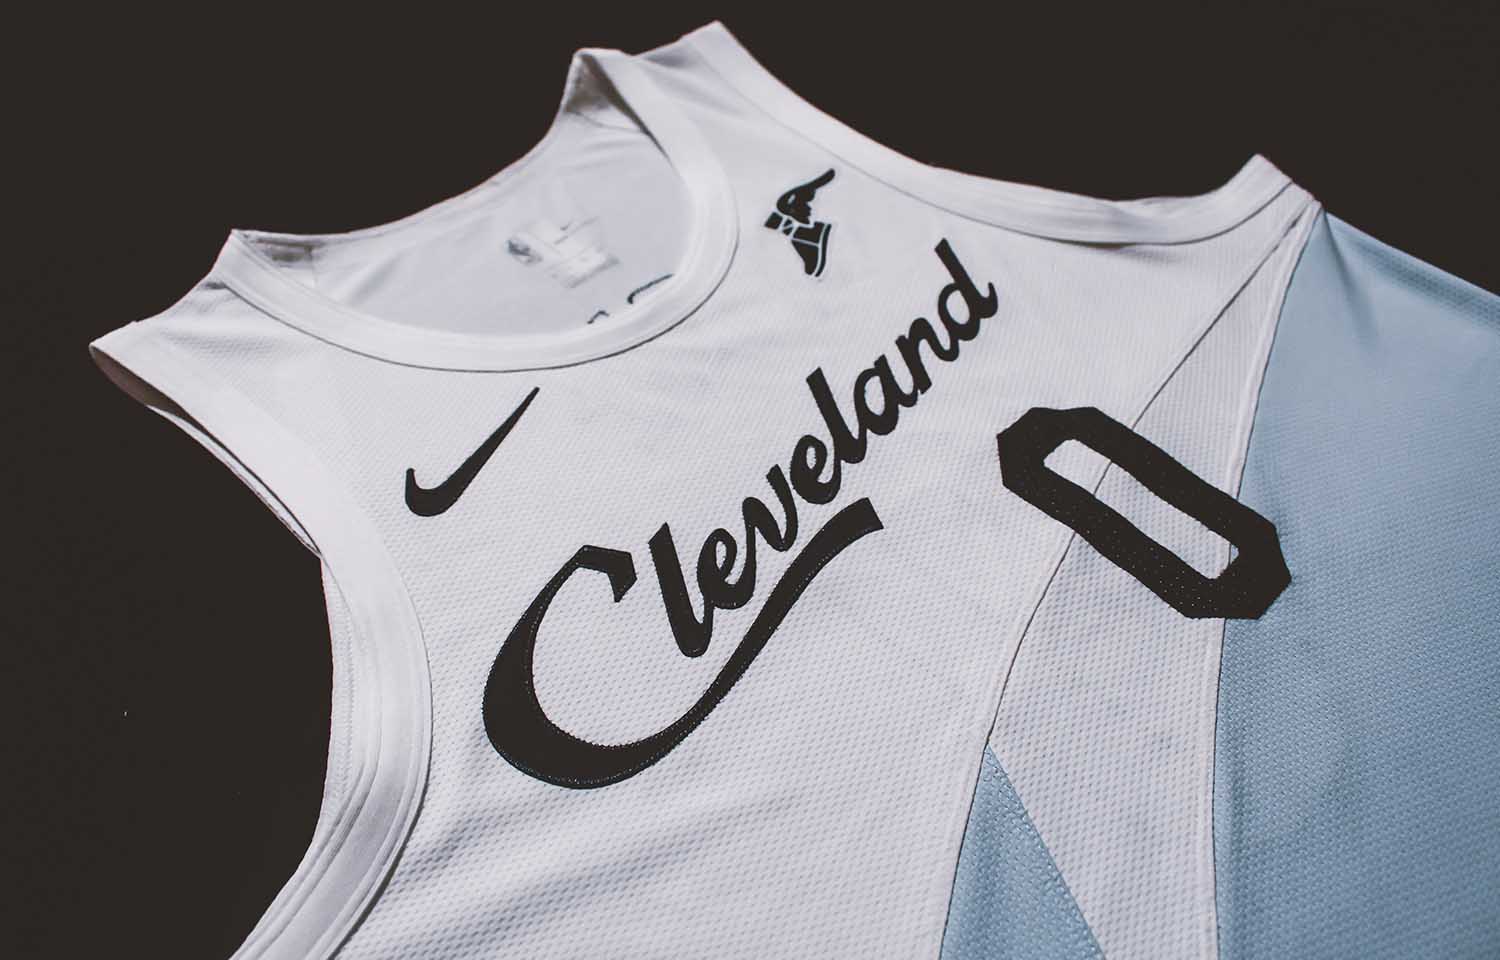 Cleveland Cavaliers unveil new uniforms for the 2022-23 NBA season